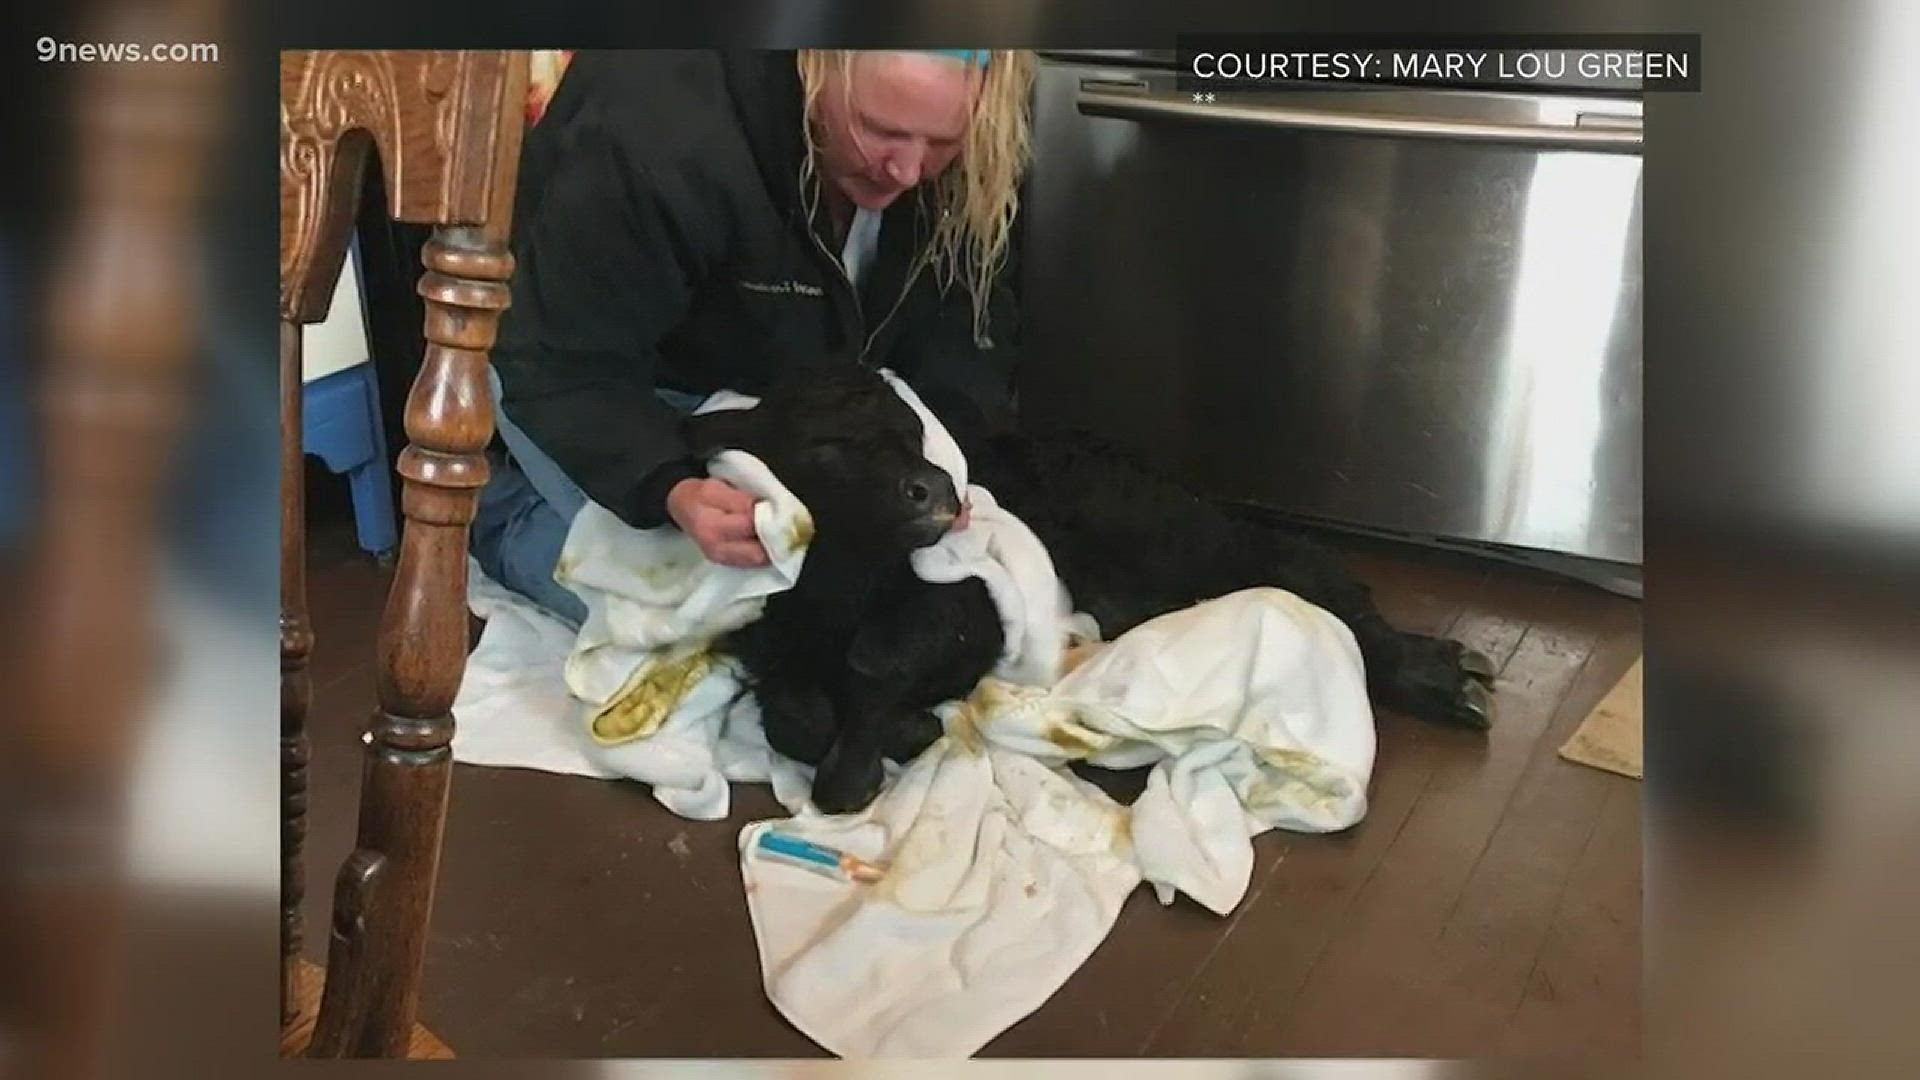 A calf that was born at a Fort Lupton ranch during the heart of Wednesday's blizzard was brought into the kitchen to warm up.